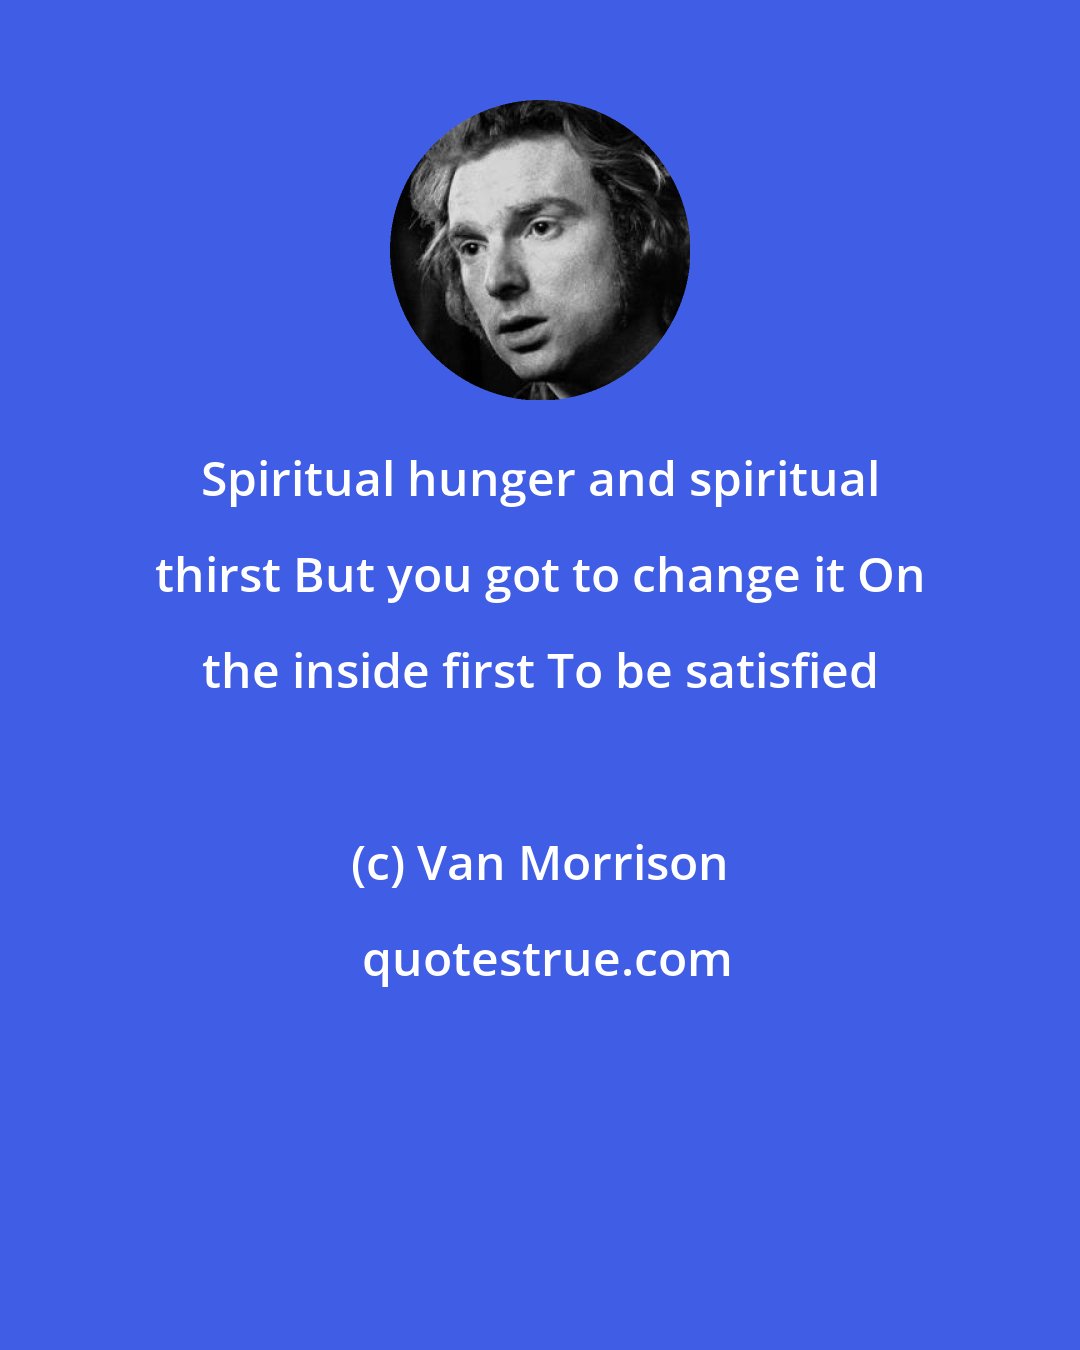 Van Morrison: Spiritual hunger and spiritual thirst But you got to change it On the inside first To be satisfied